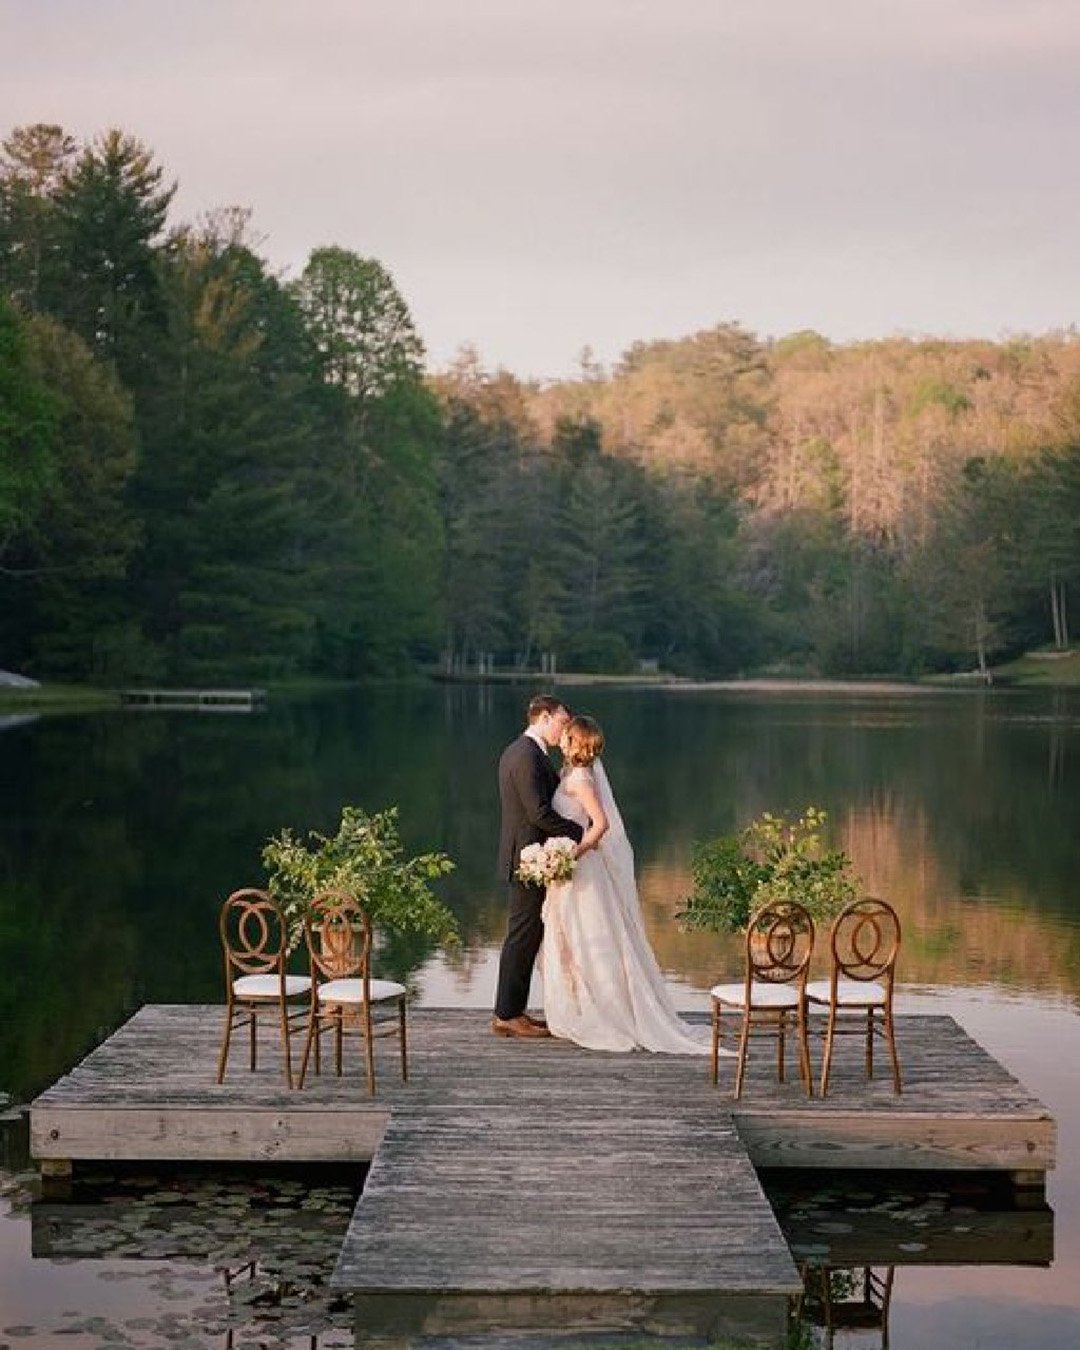 micro wedding venues groom and bride kissing on dock davy whitener